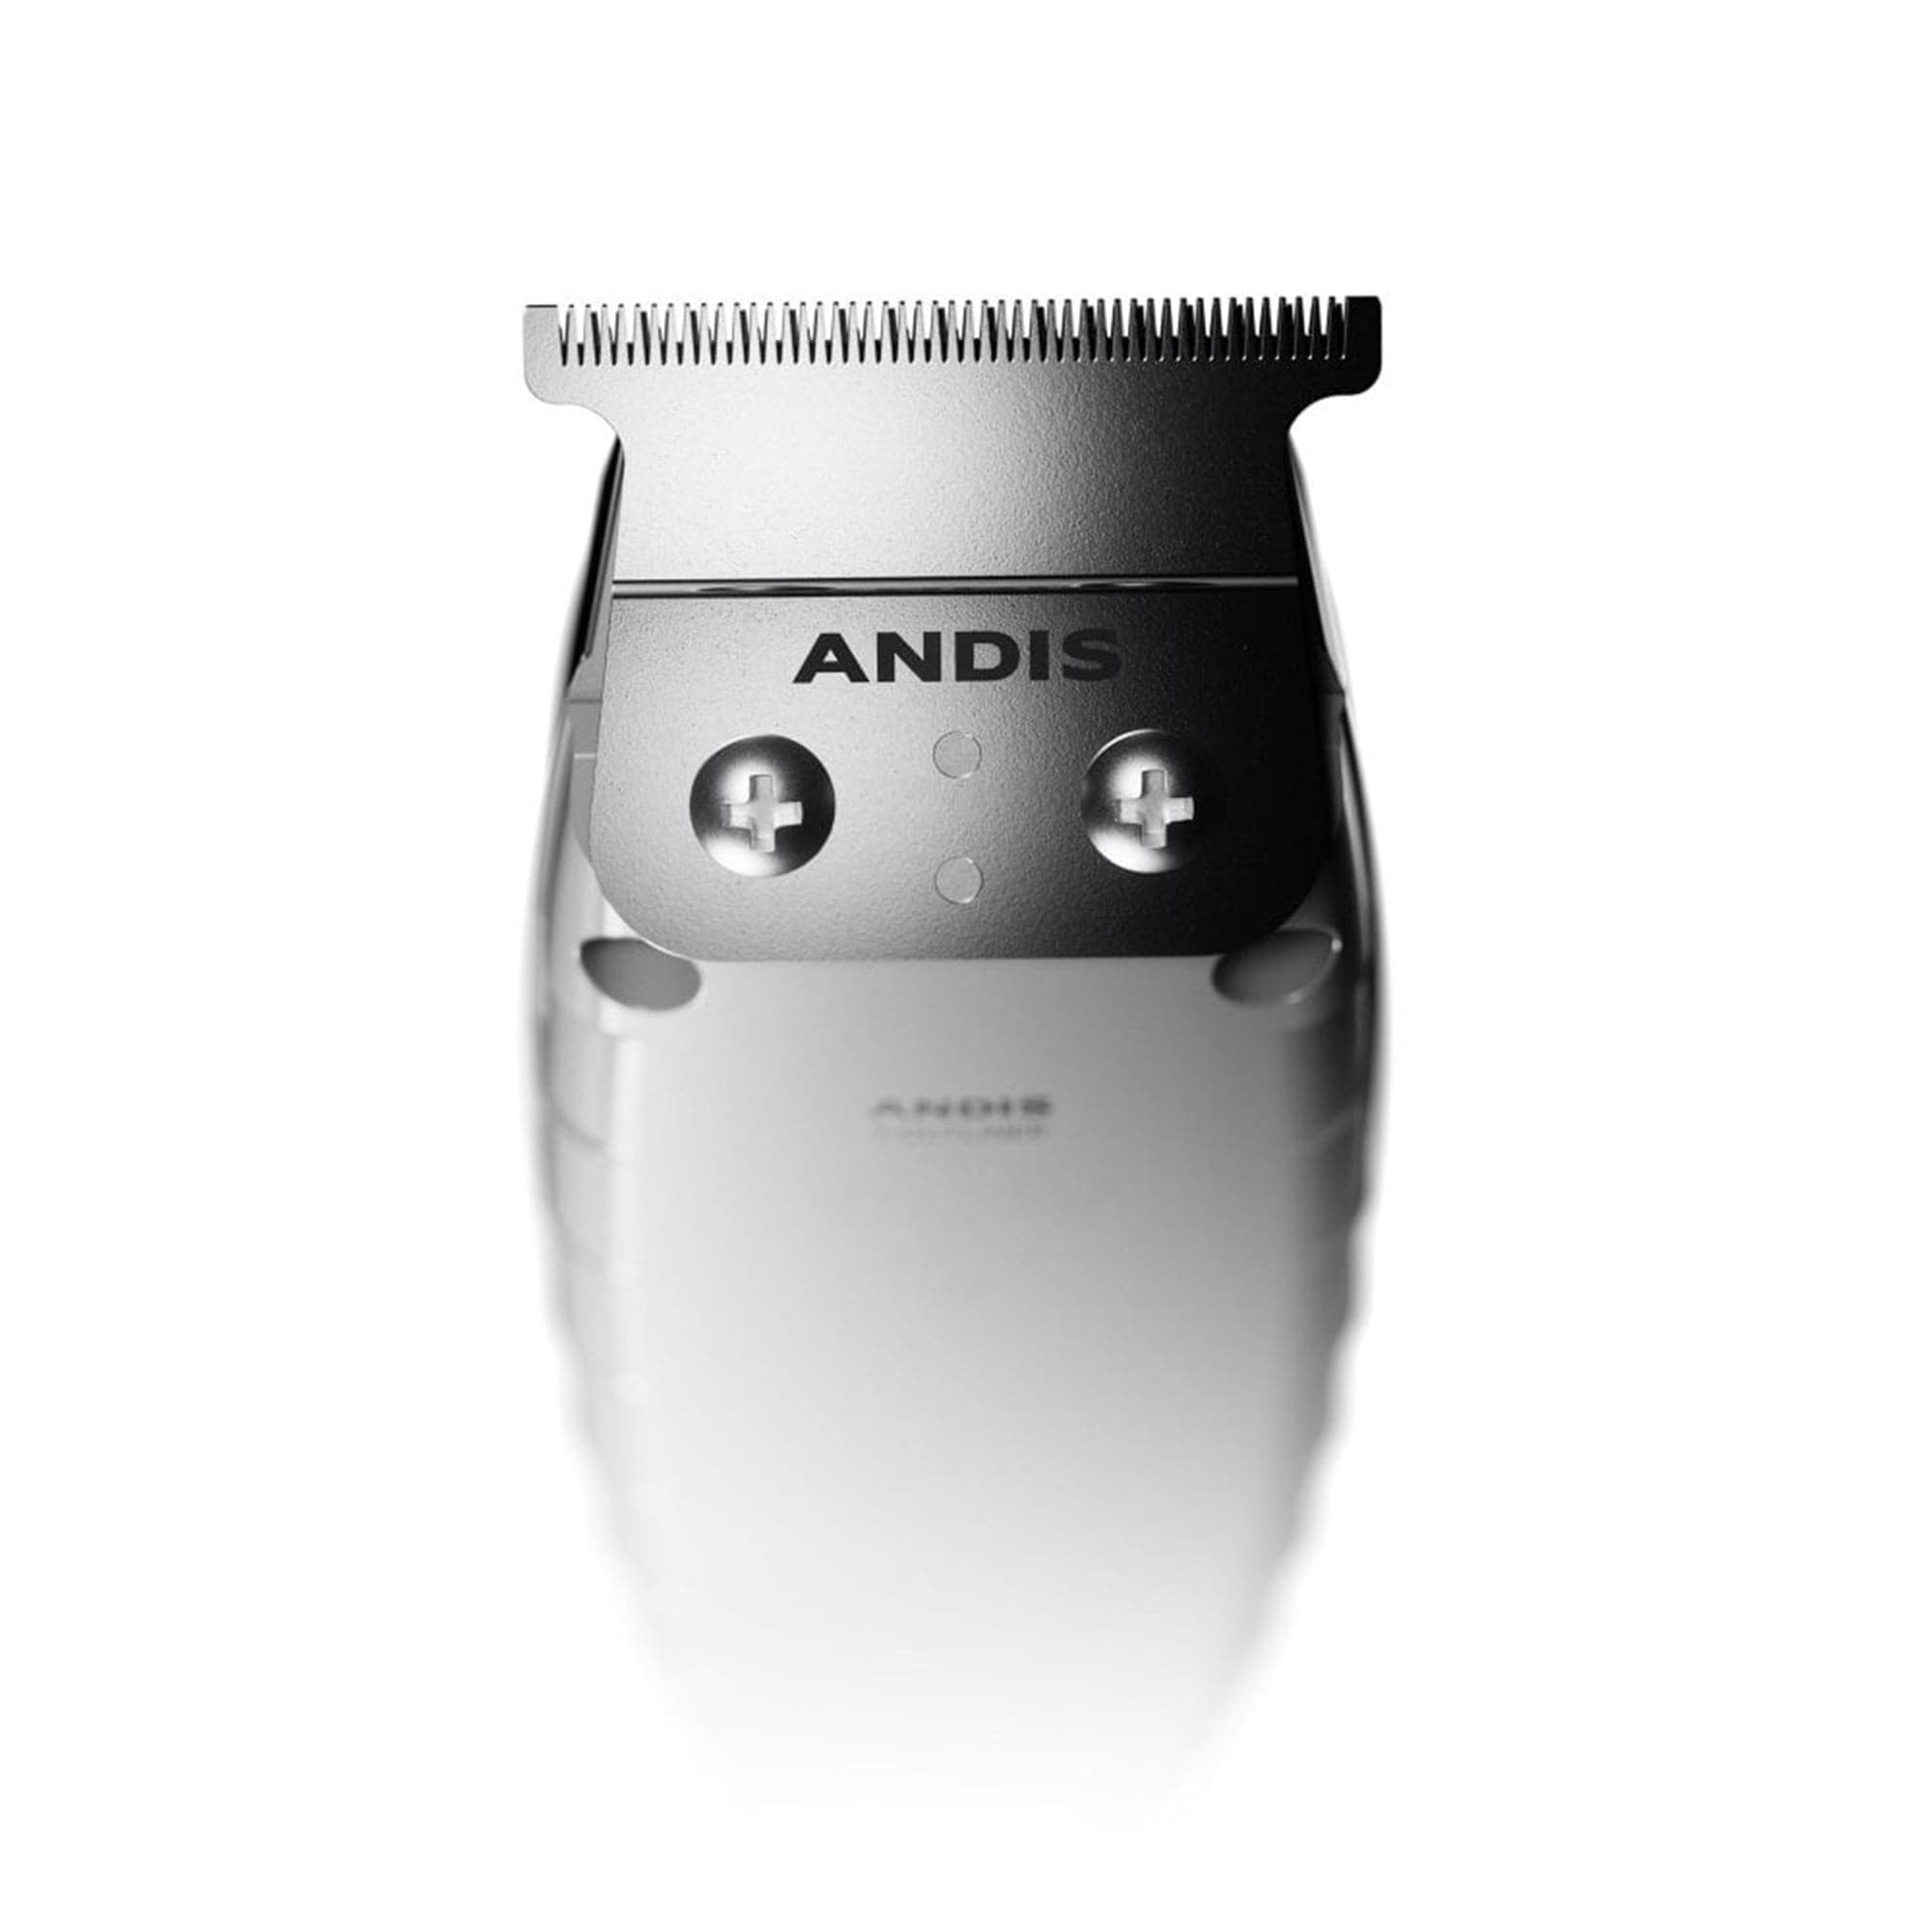 Andis - T-Outliner Corded Trimmer - Eson Direct